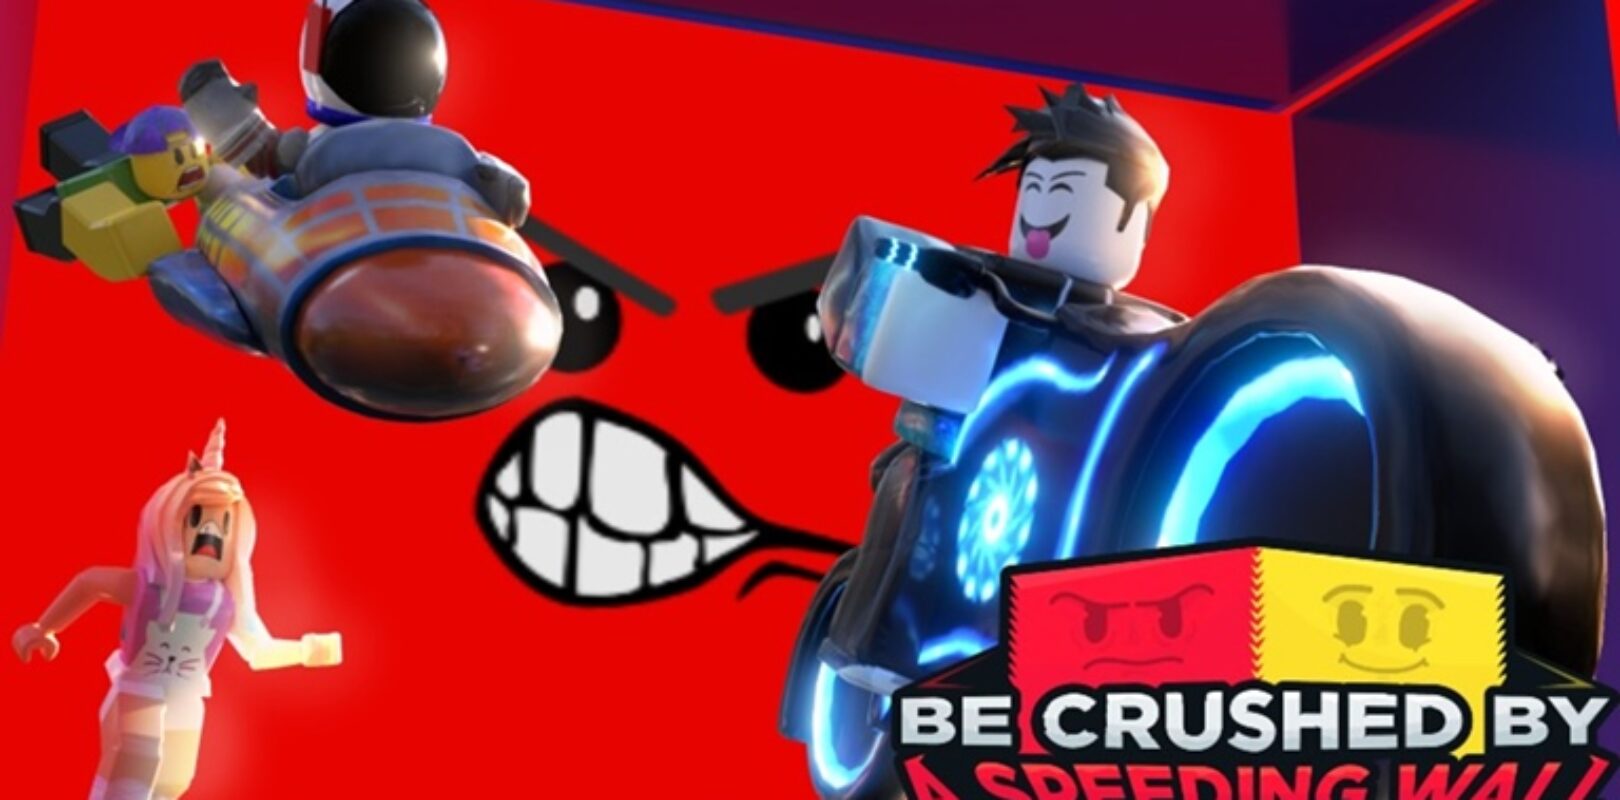 Be Crushed By A Speeding Wall Codes 2020 Pivotal Gamers - roblox get crushed by a speeding wall codes 2020 august